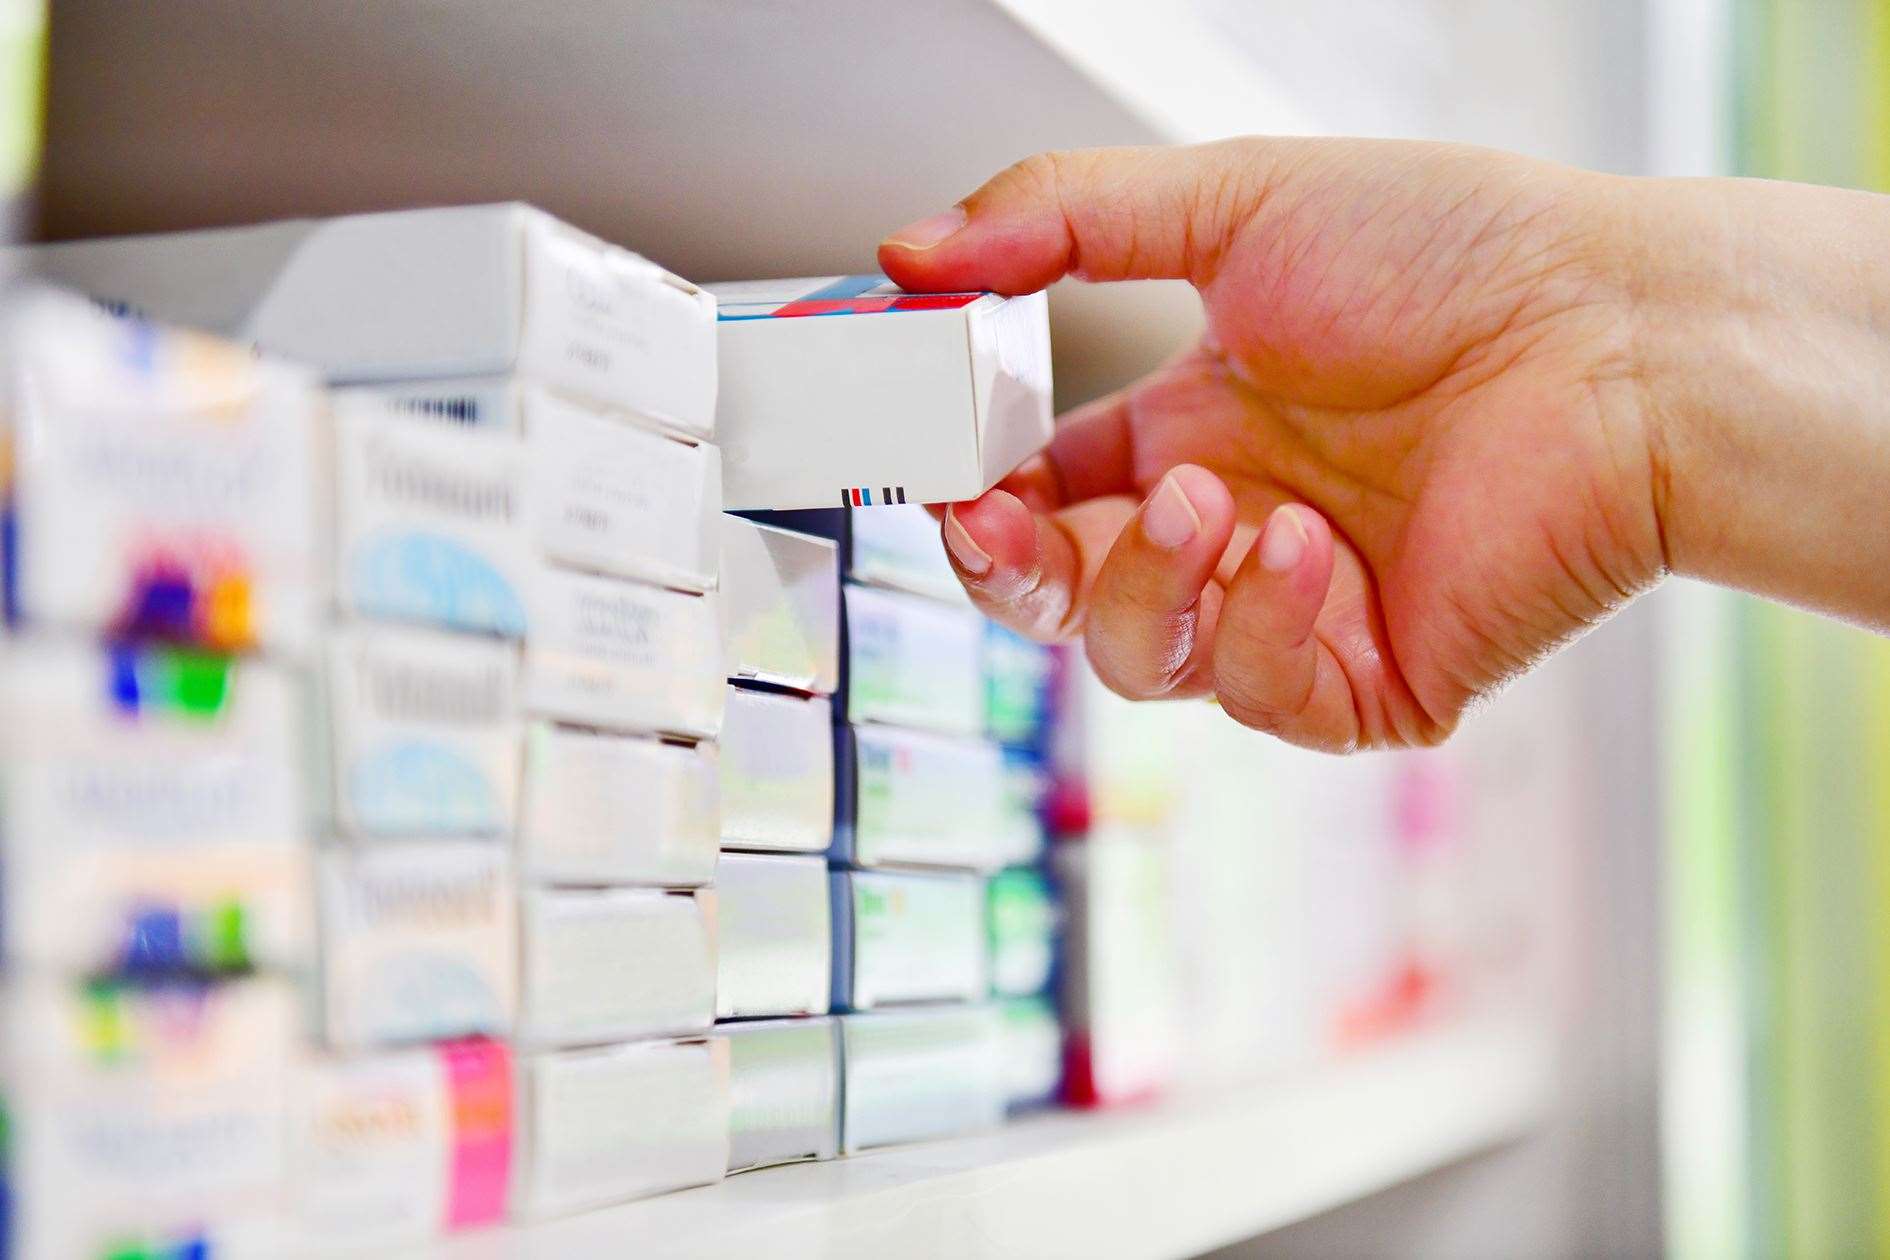 Pharmacies have a role to play/